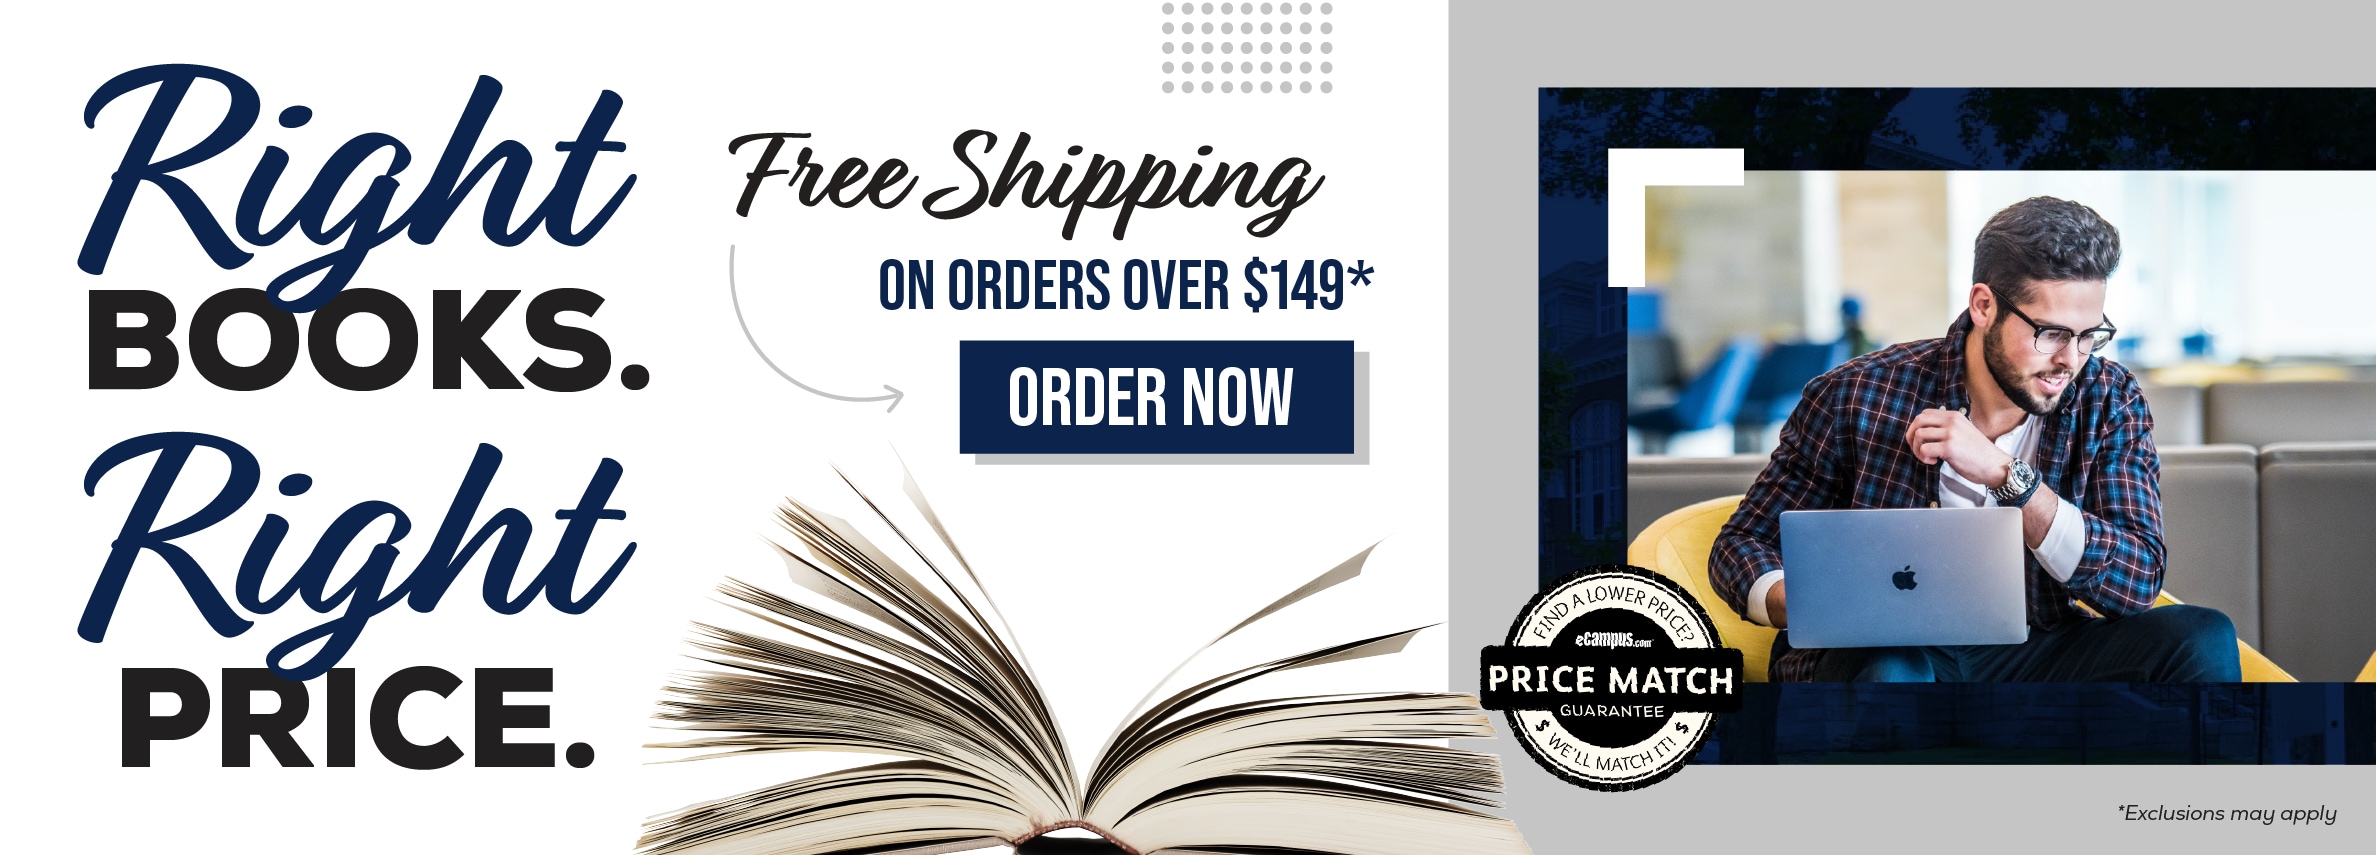 Right books. Right price. Free shipping on orders over $149.* Order now. Price Match Guarantee. *Exclusions may apply.